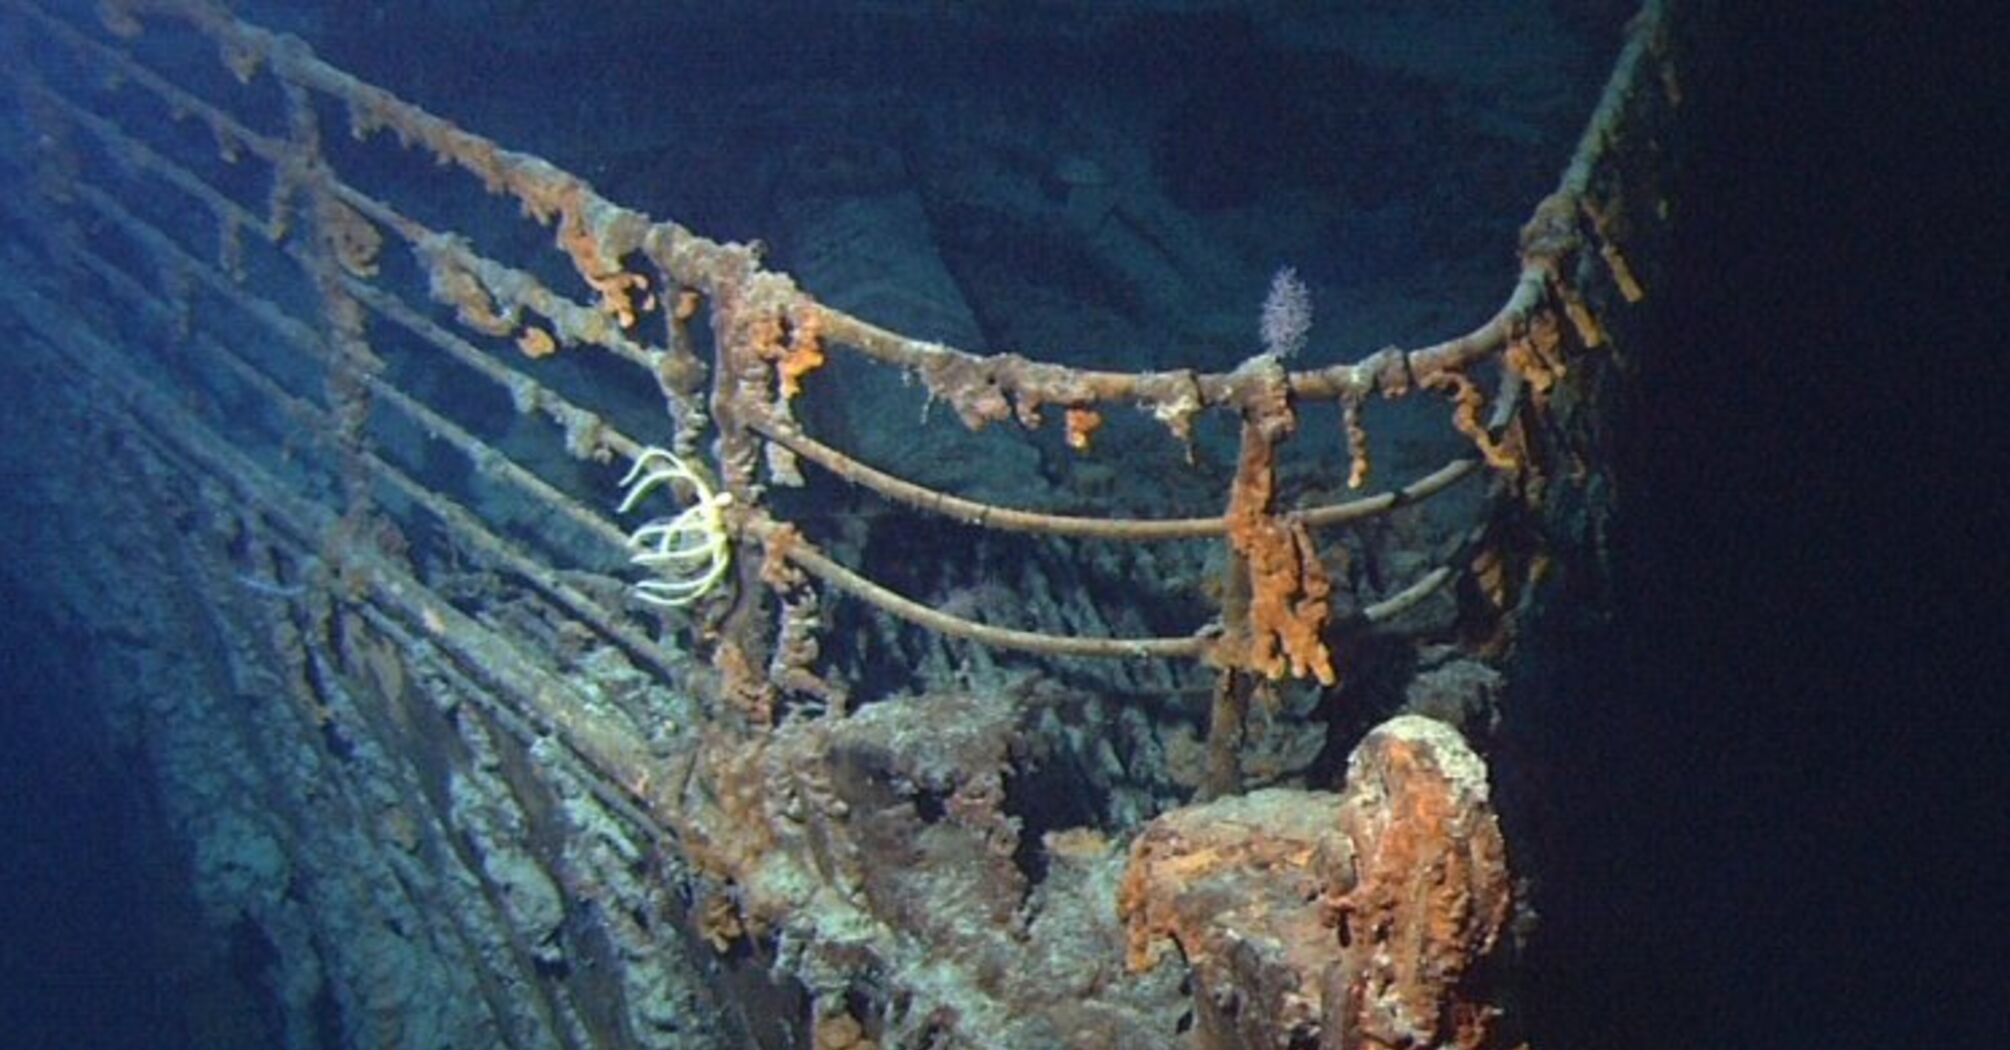 Where the remains of the bodies of Titanic passengers disappeared: scientists made a stunning discovery